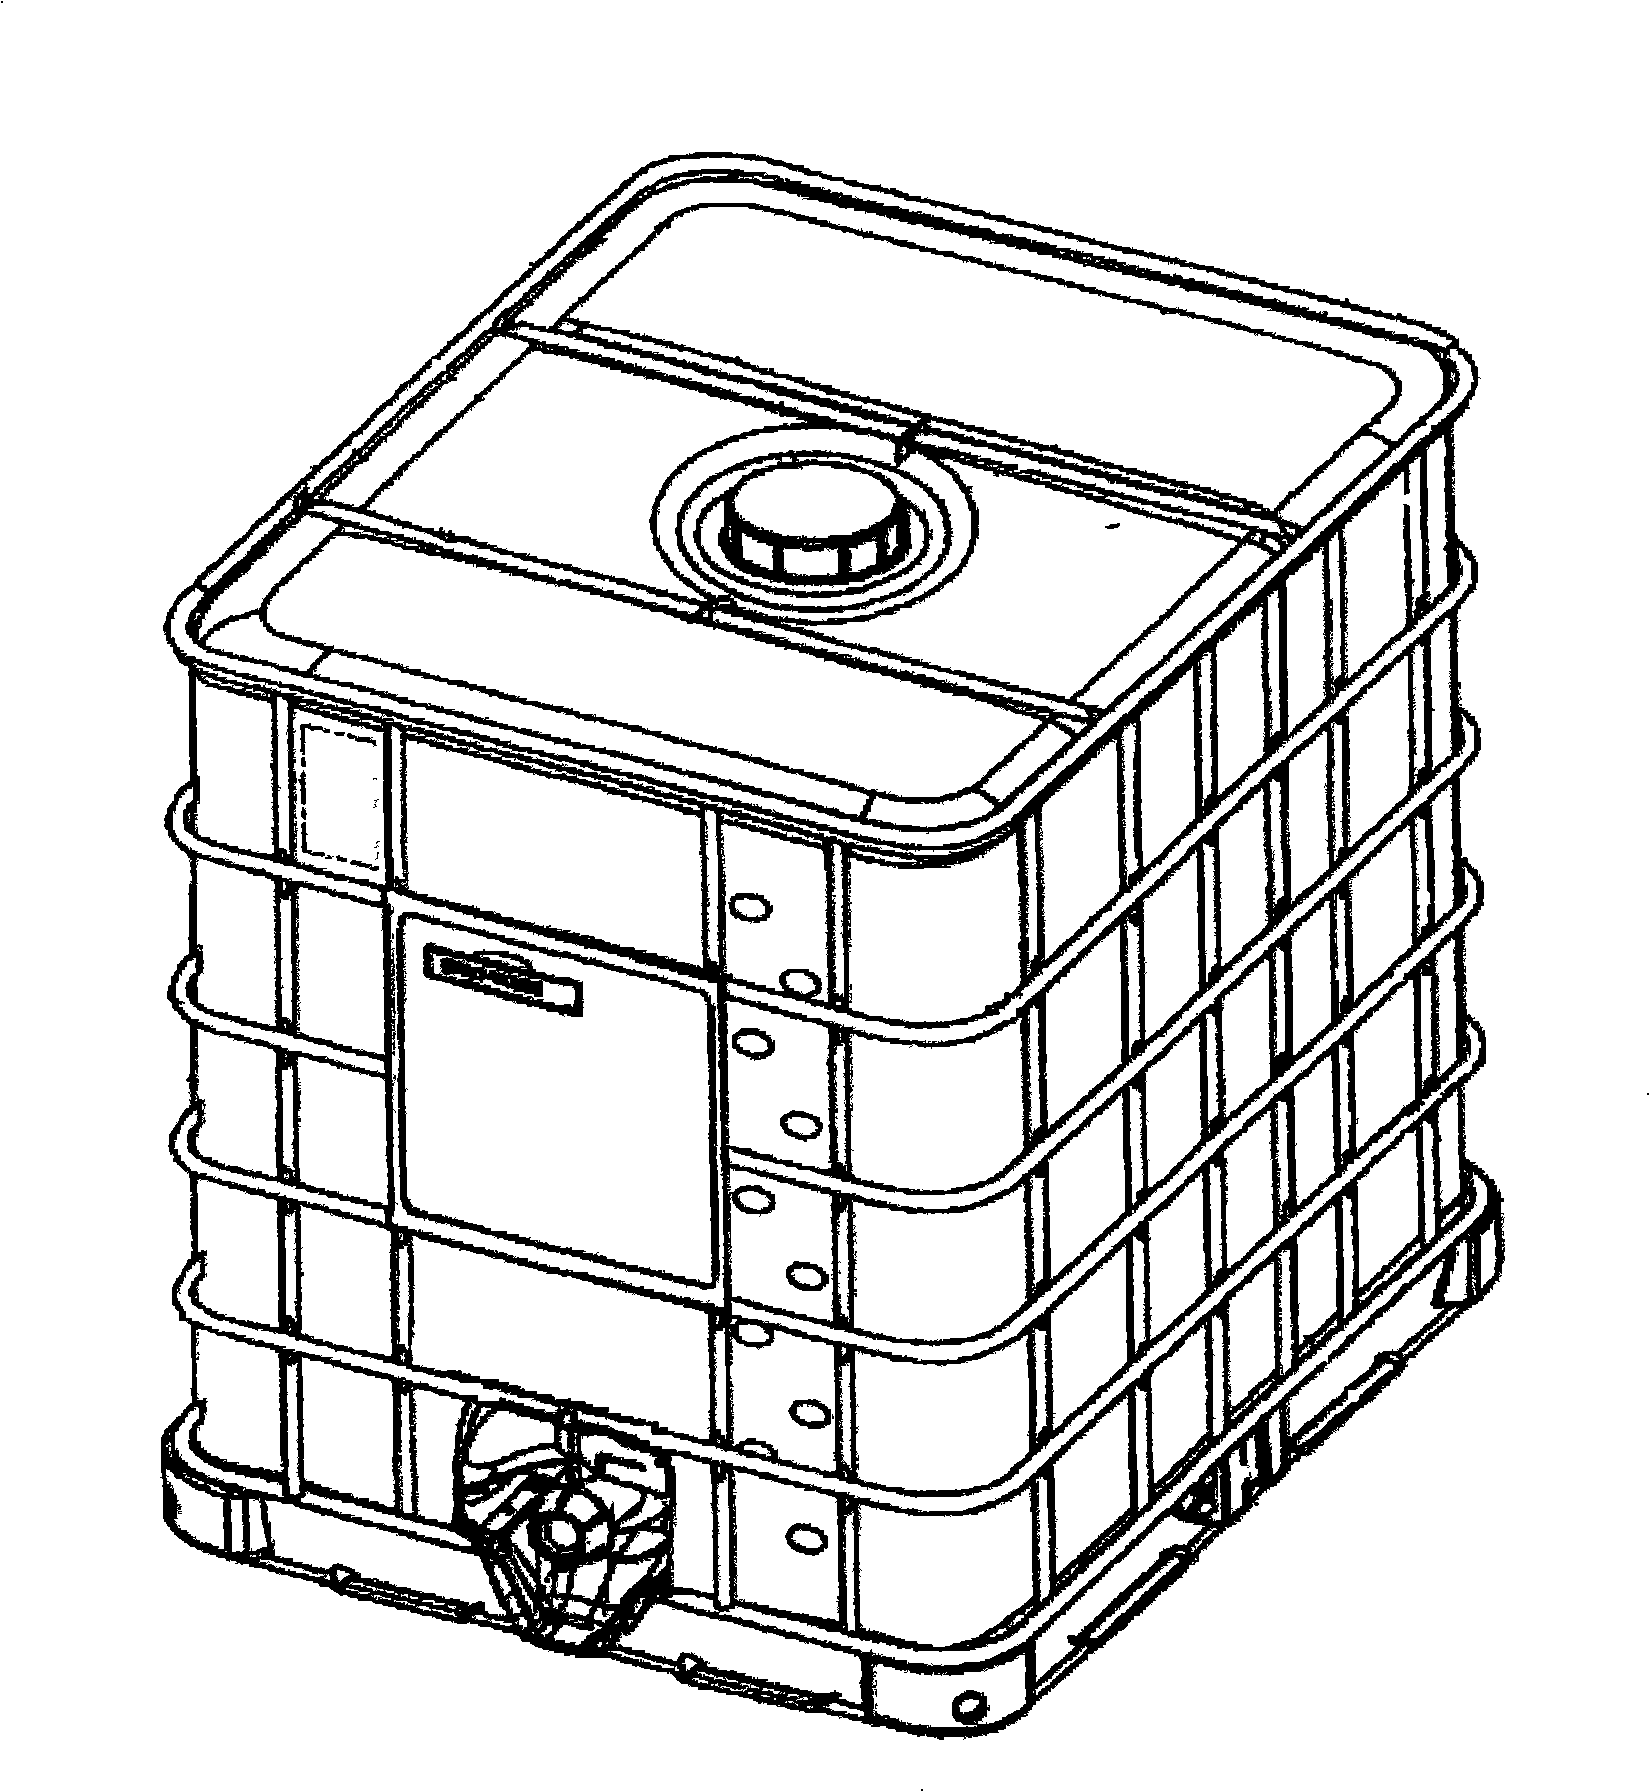 Novel medium-sized bulk loading container with liquid discharge lid